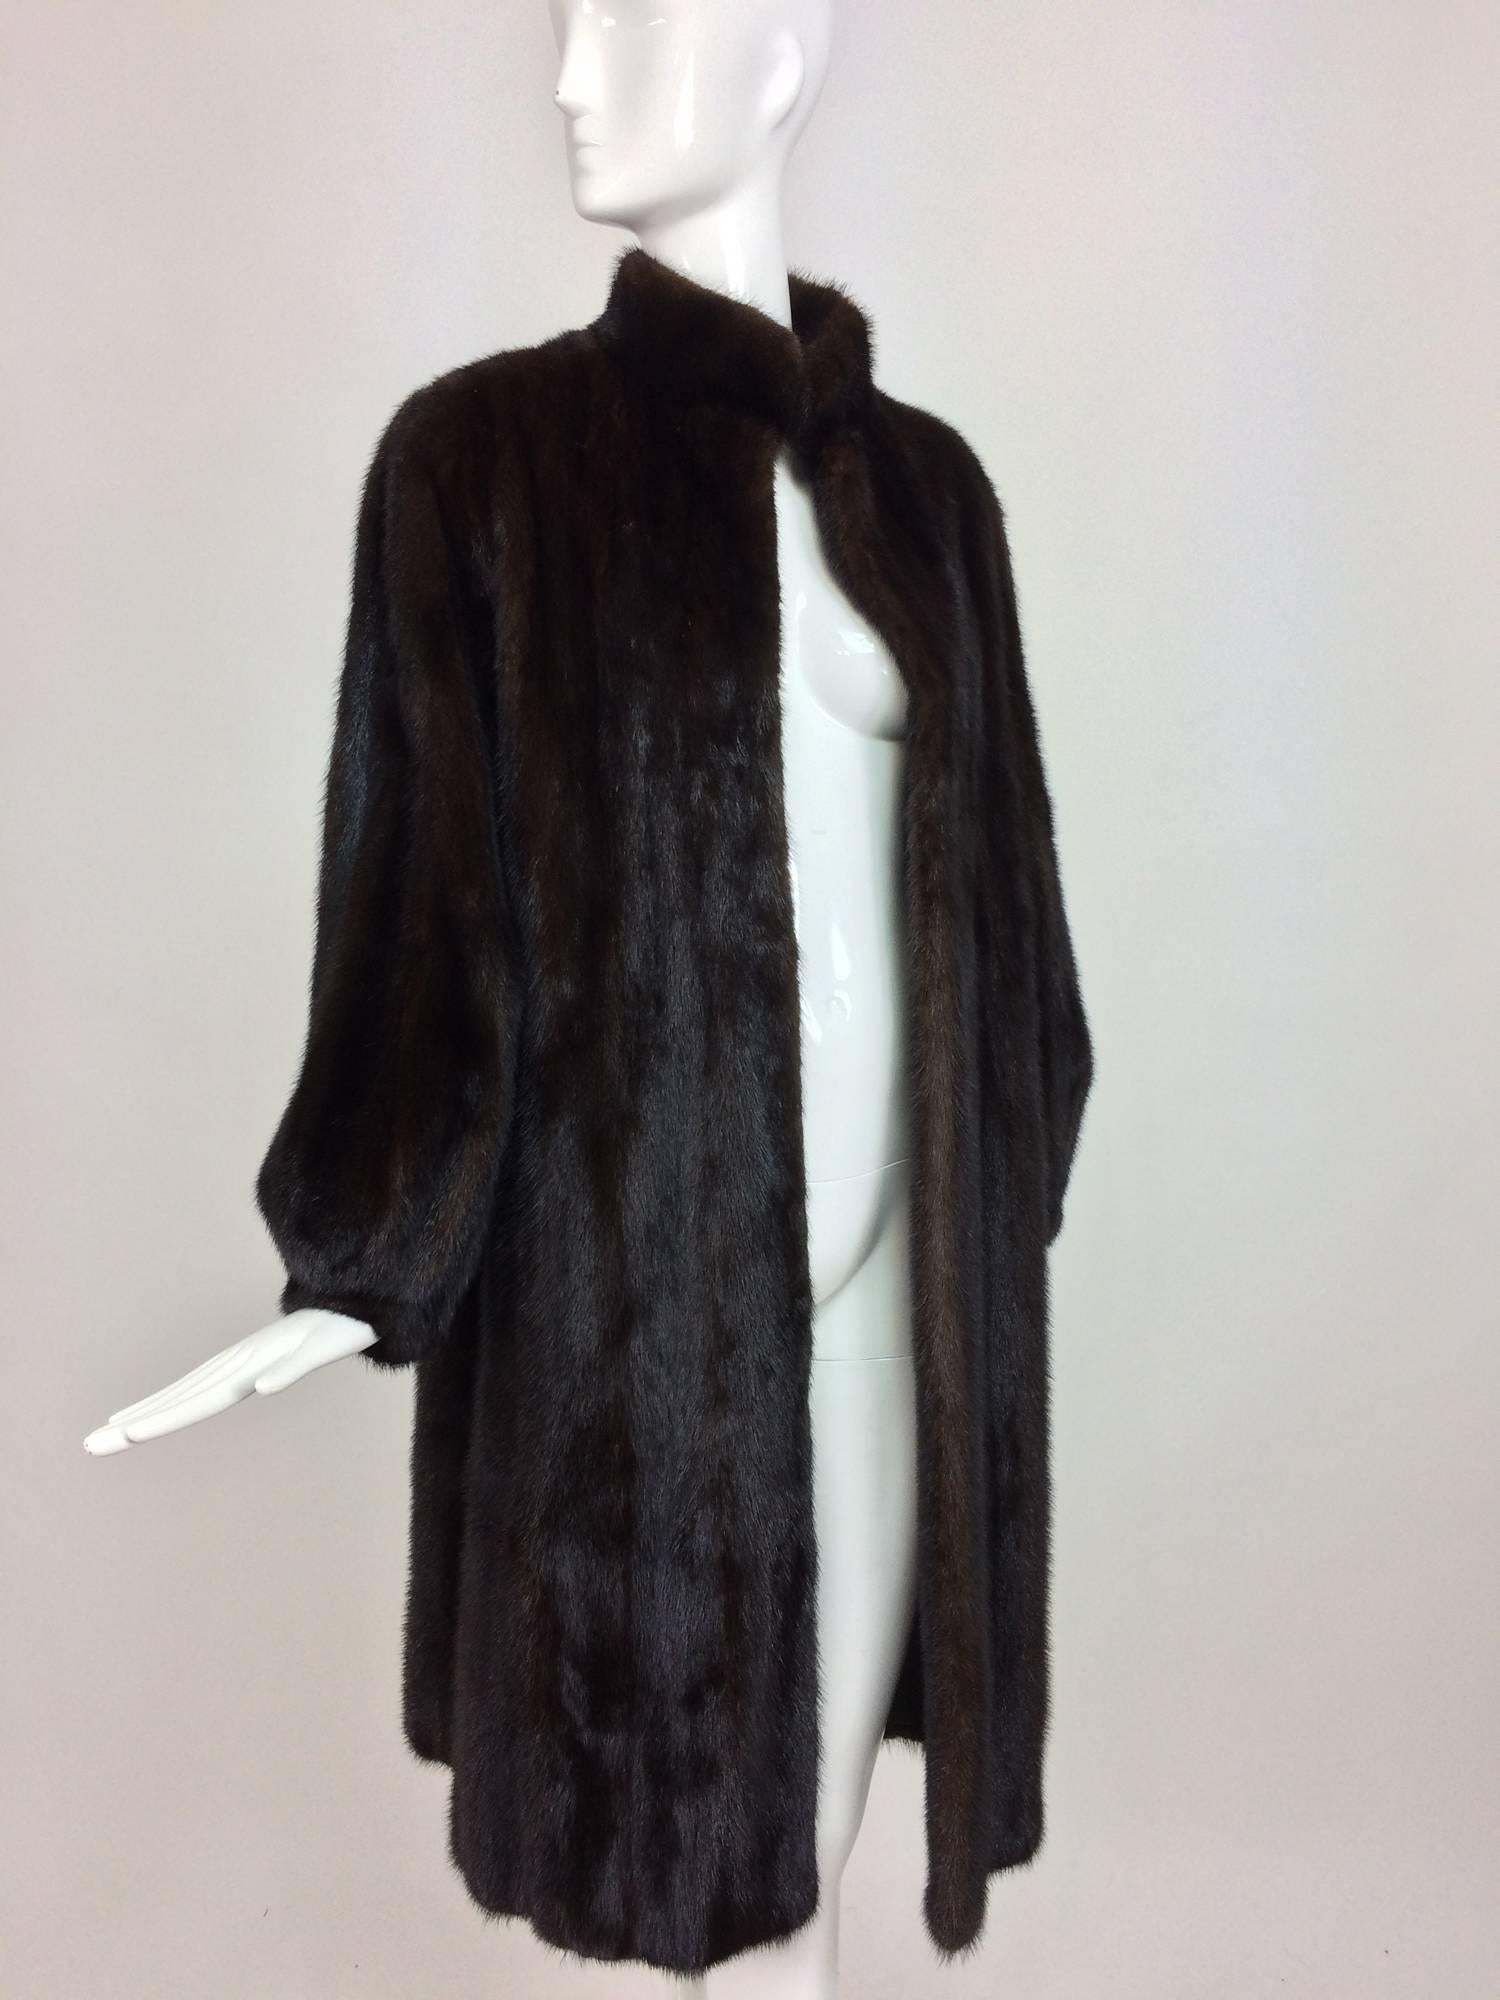 Full length lustrous dark mink coat with gathered cuffs from the 1960s...A beautiful coat, with a stand up collar, long semi full sleeves with banded cuffs and on seam front pockets...There are no closures to this coat and no evidence there were